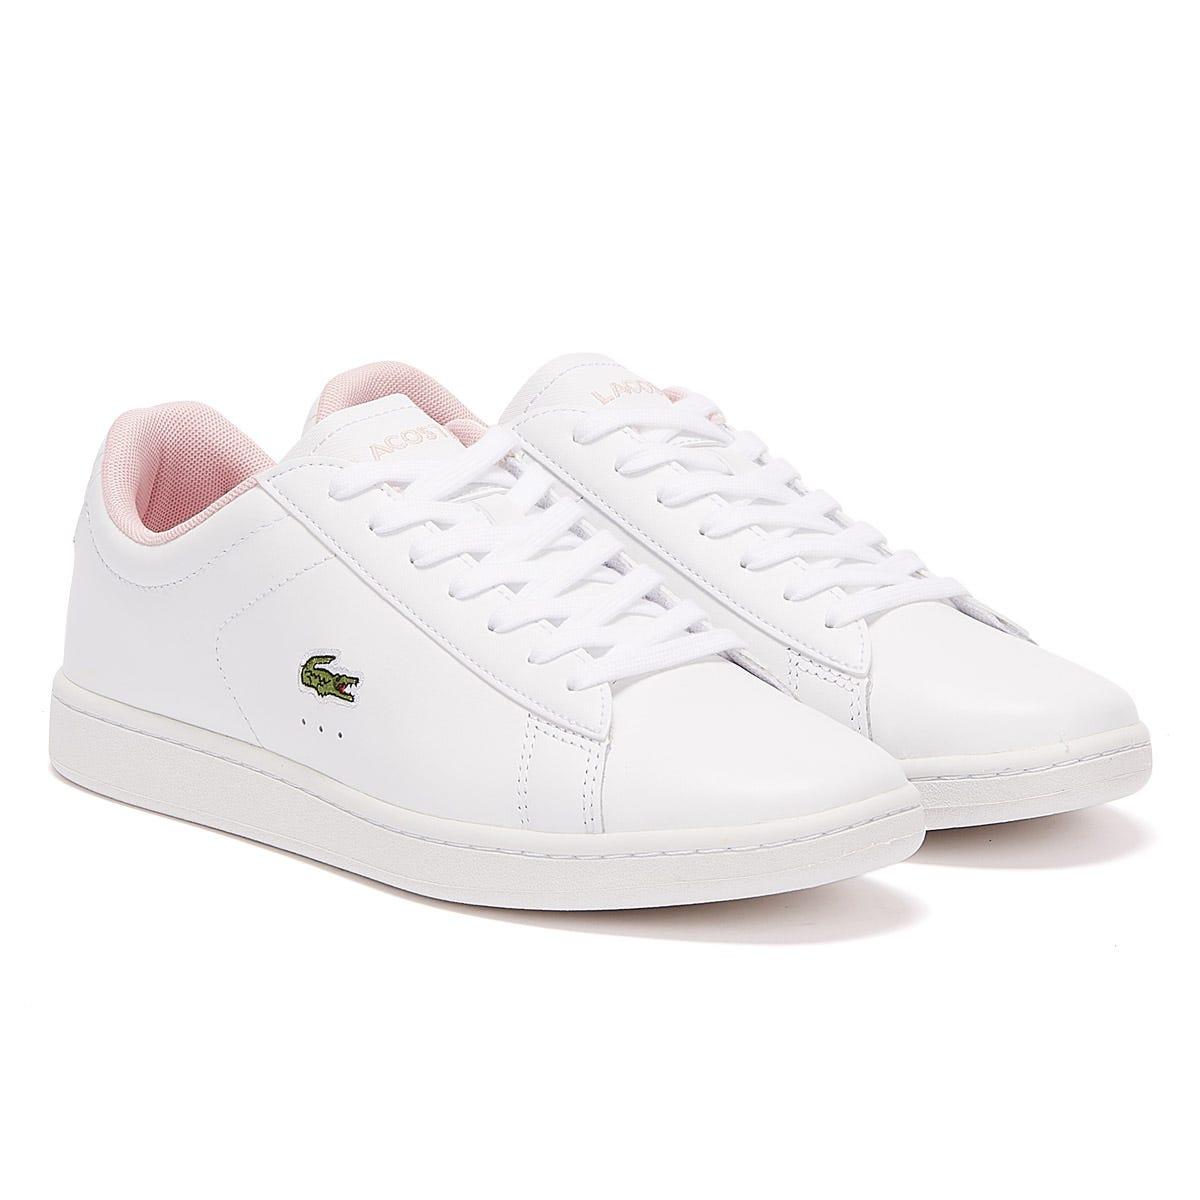 Ni tigger en anden Girls Pink Lacoste Trainers Flash Sales - www.puzzlewood.net 1695260993